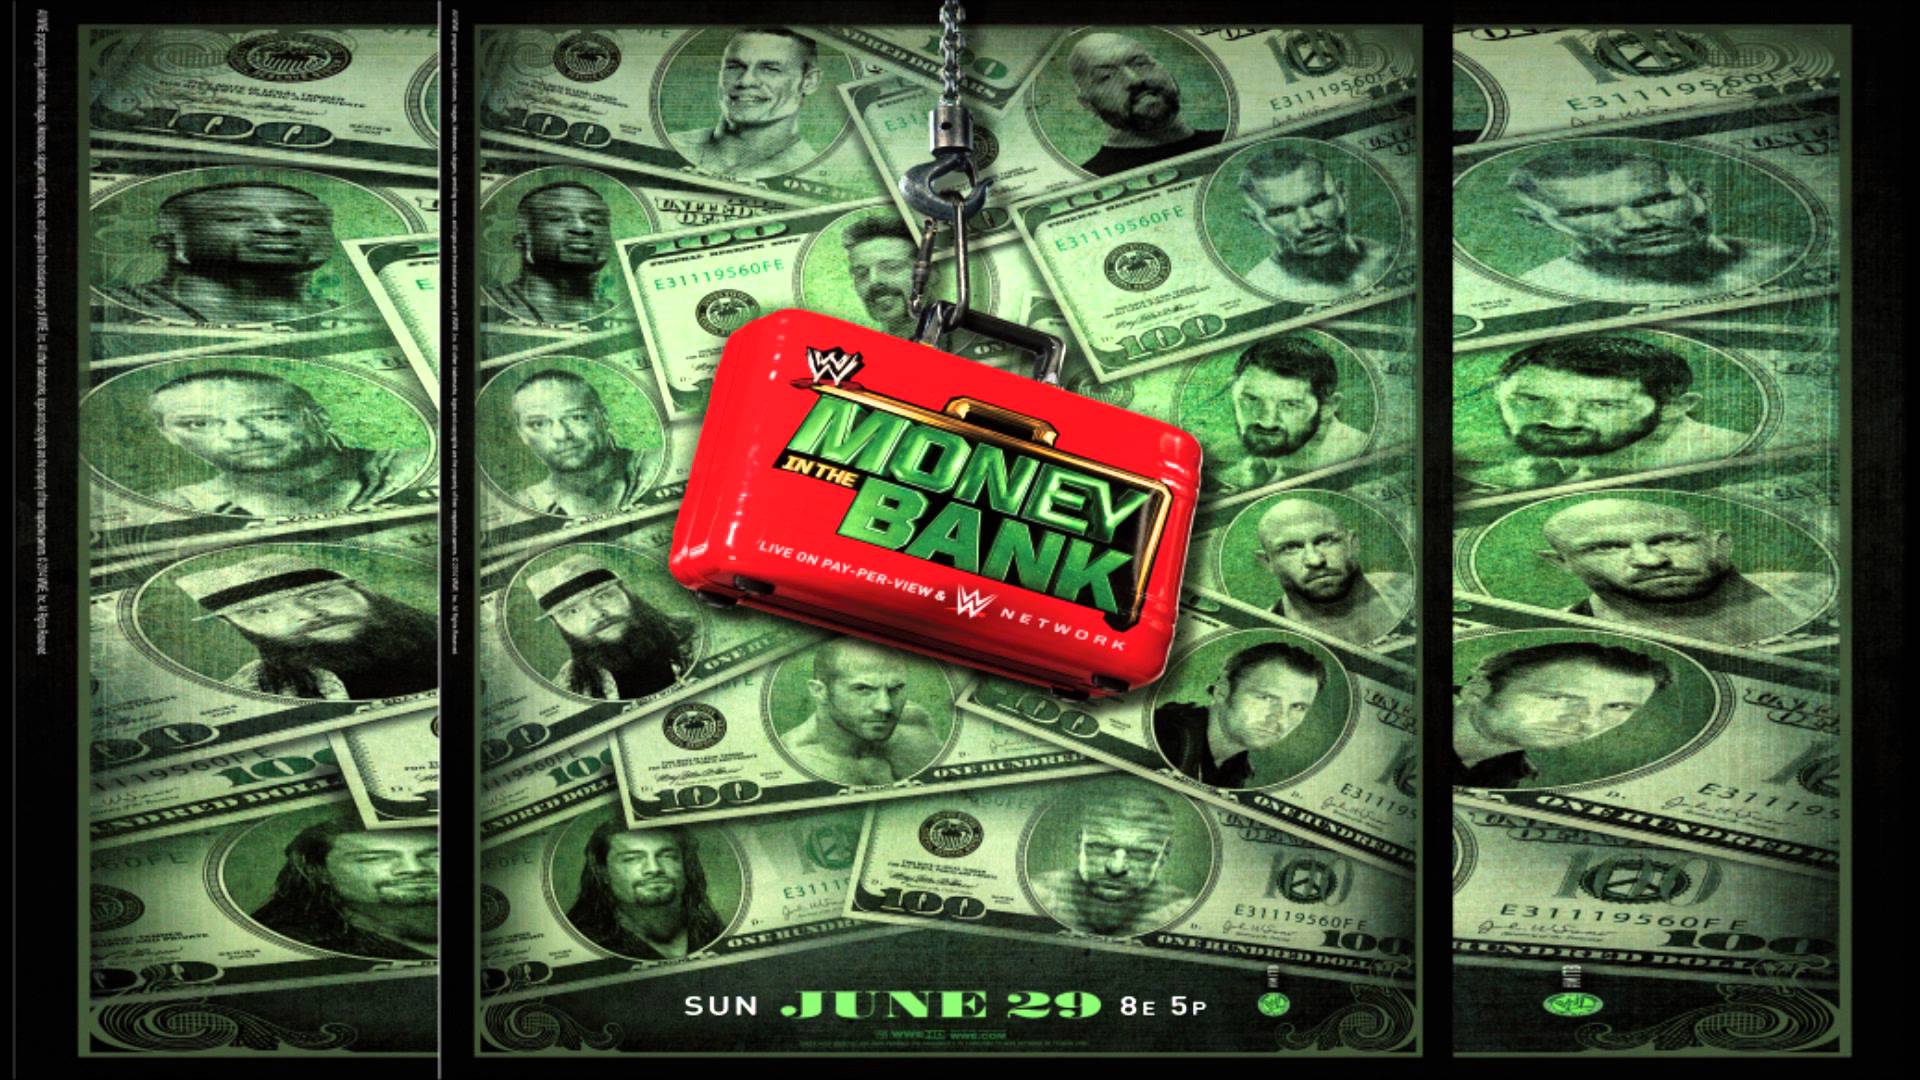 WWE Money In The Bank 2014 Official Poster